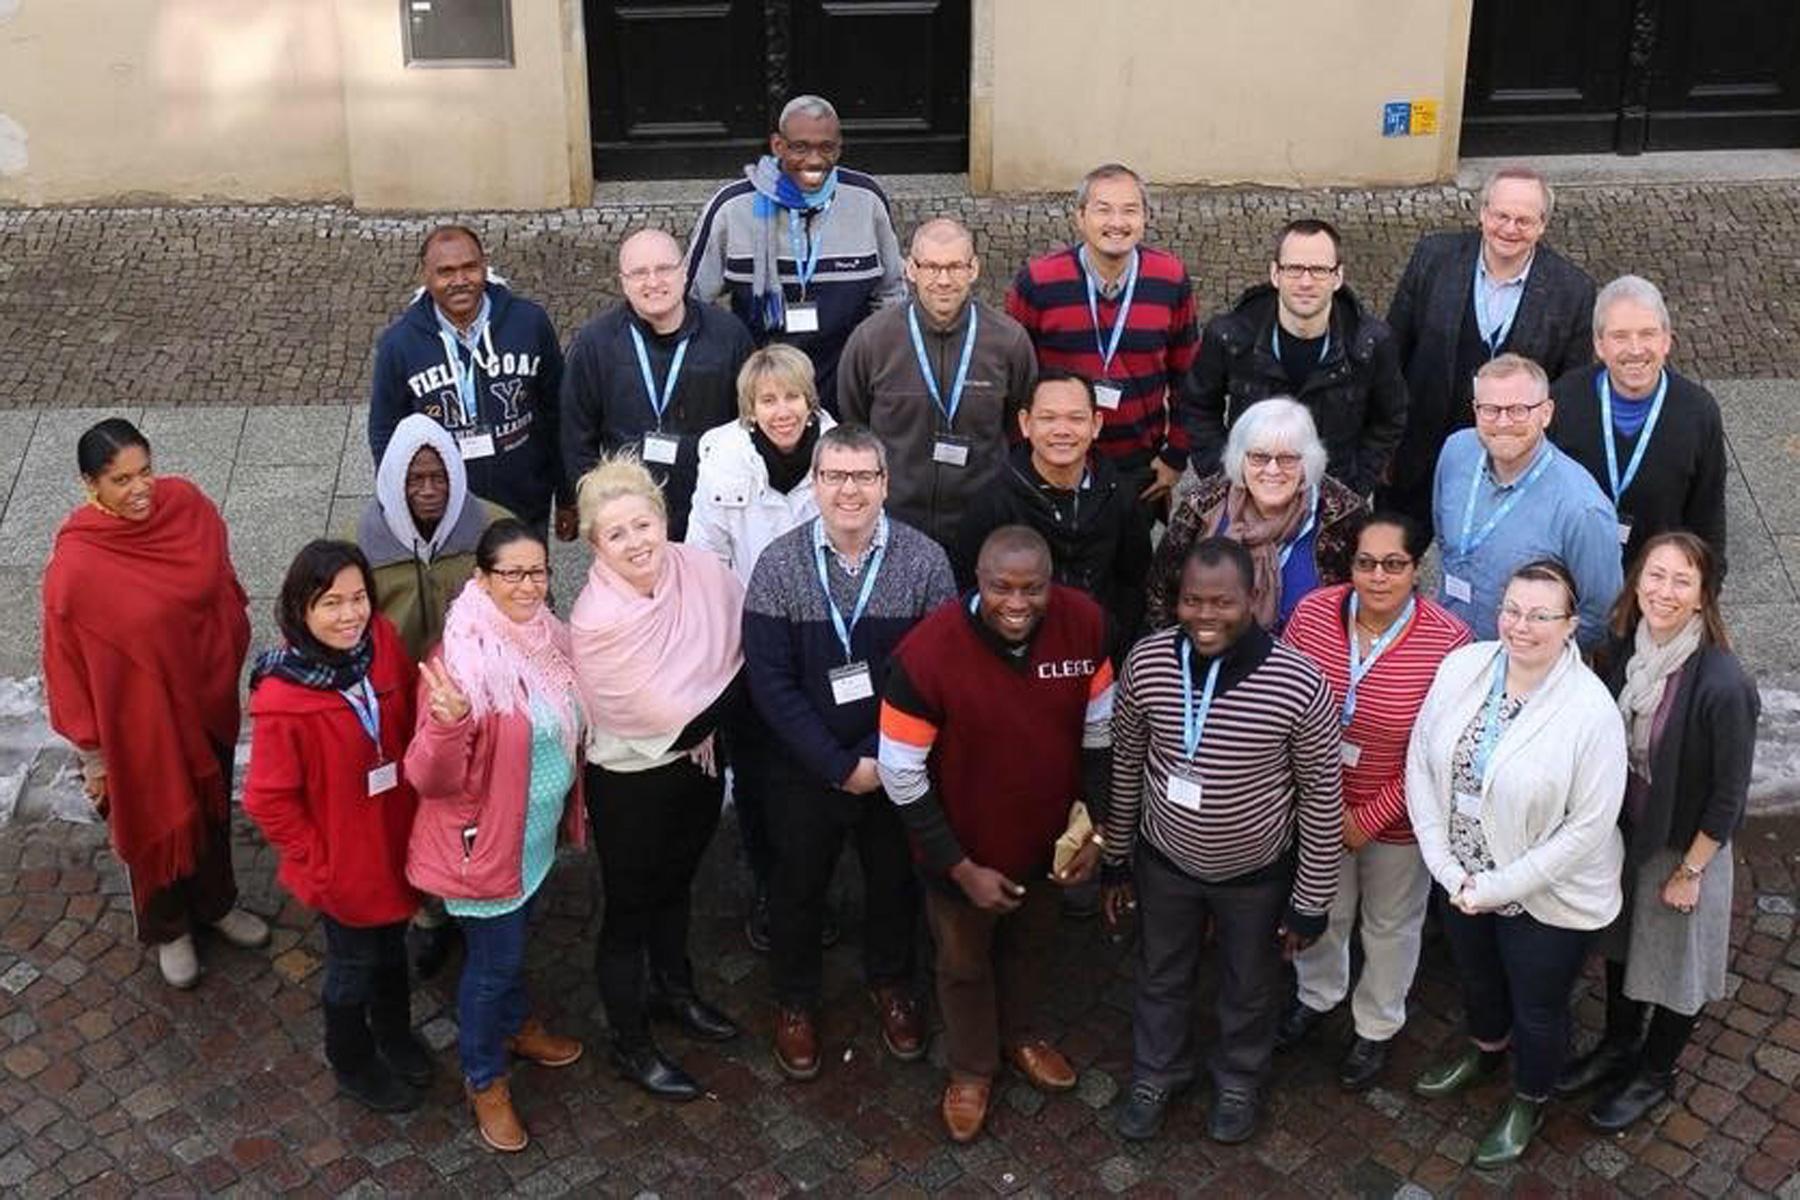 Participants at the 17th International Seminar for Pastors in Lutherstadt Wittenberg that took place from March 3rd to March 17th, 2018. Photo: LWB-Zentrum Wittenberg 